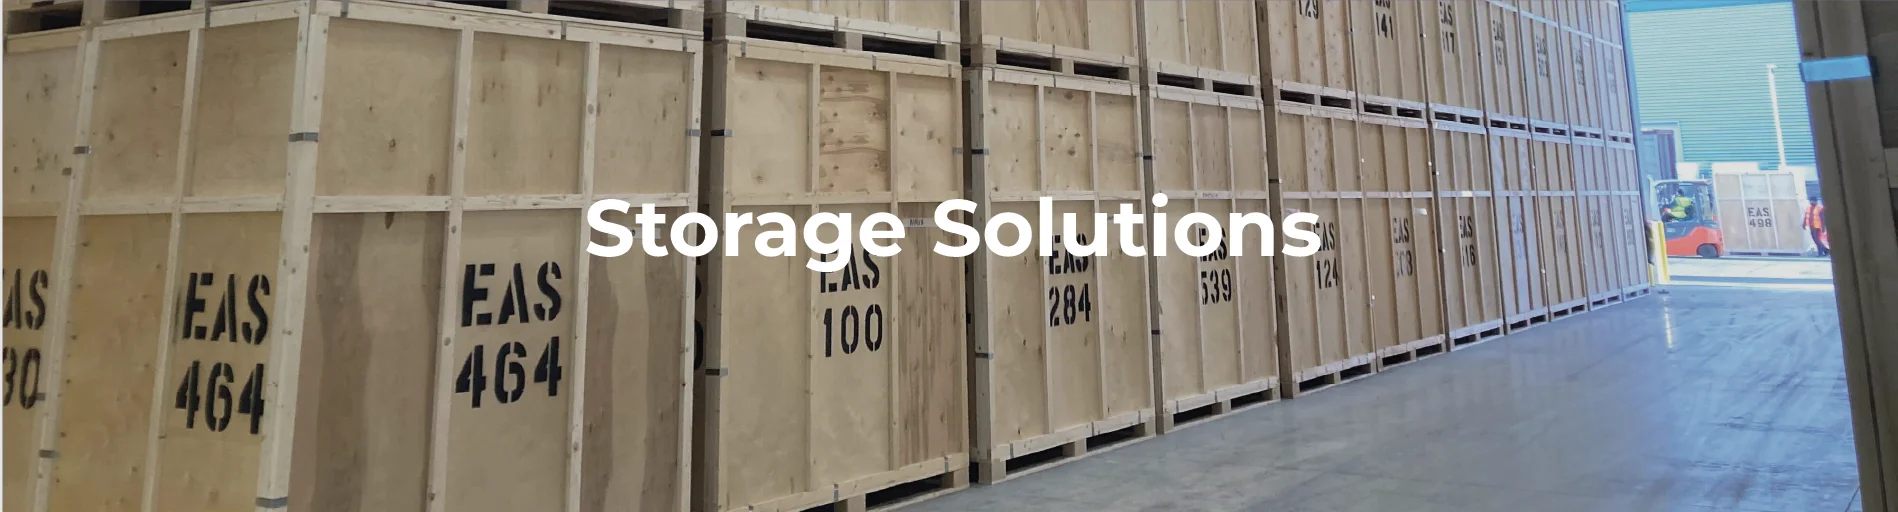 easy shipping storage solutions provider